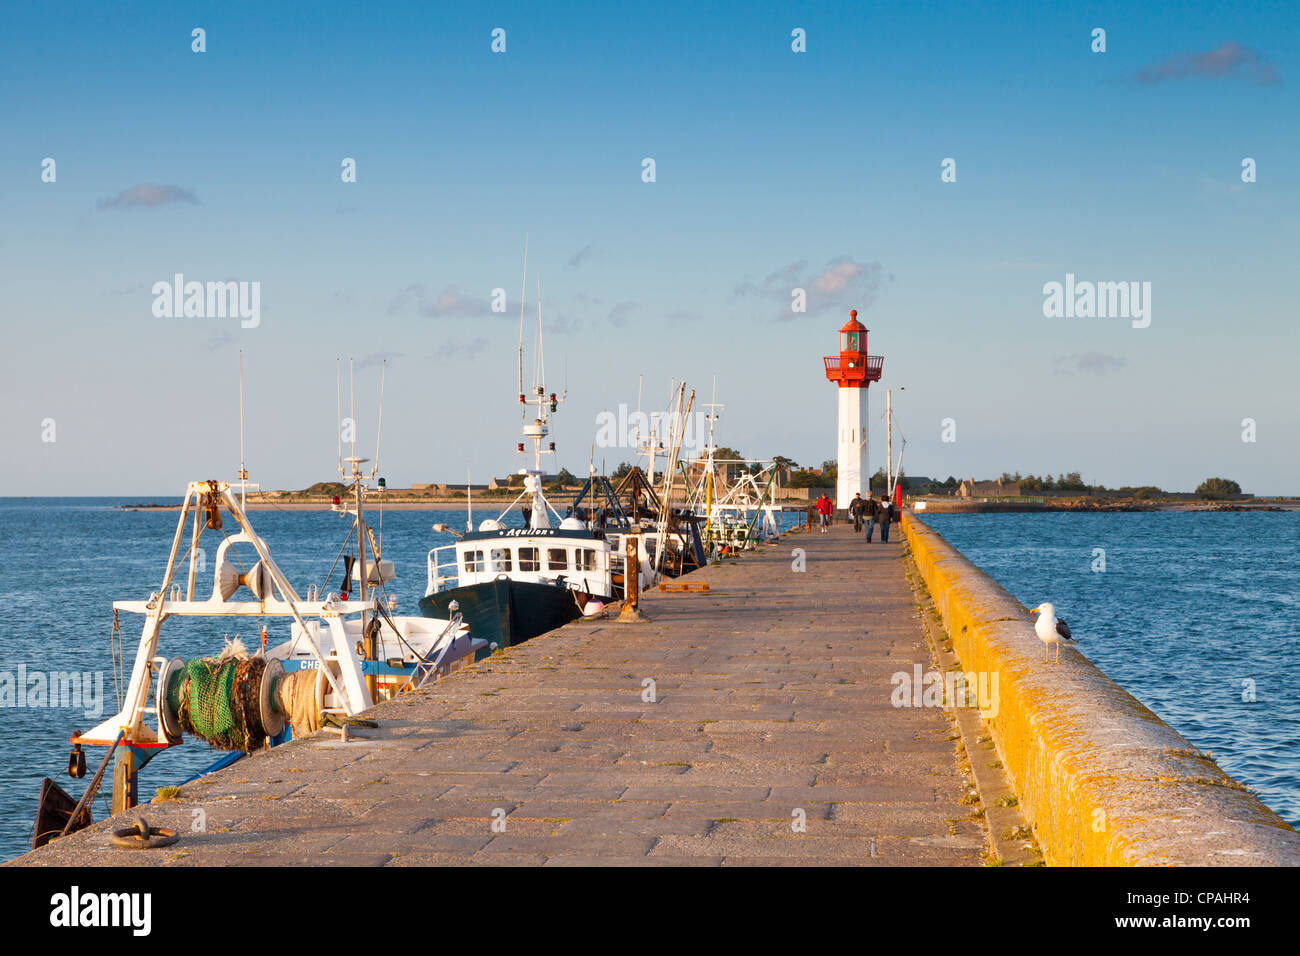 The small fishing port of St-Vaast-La-Hougue, Normandy, France, Stock Photo